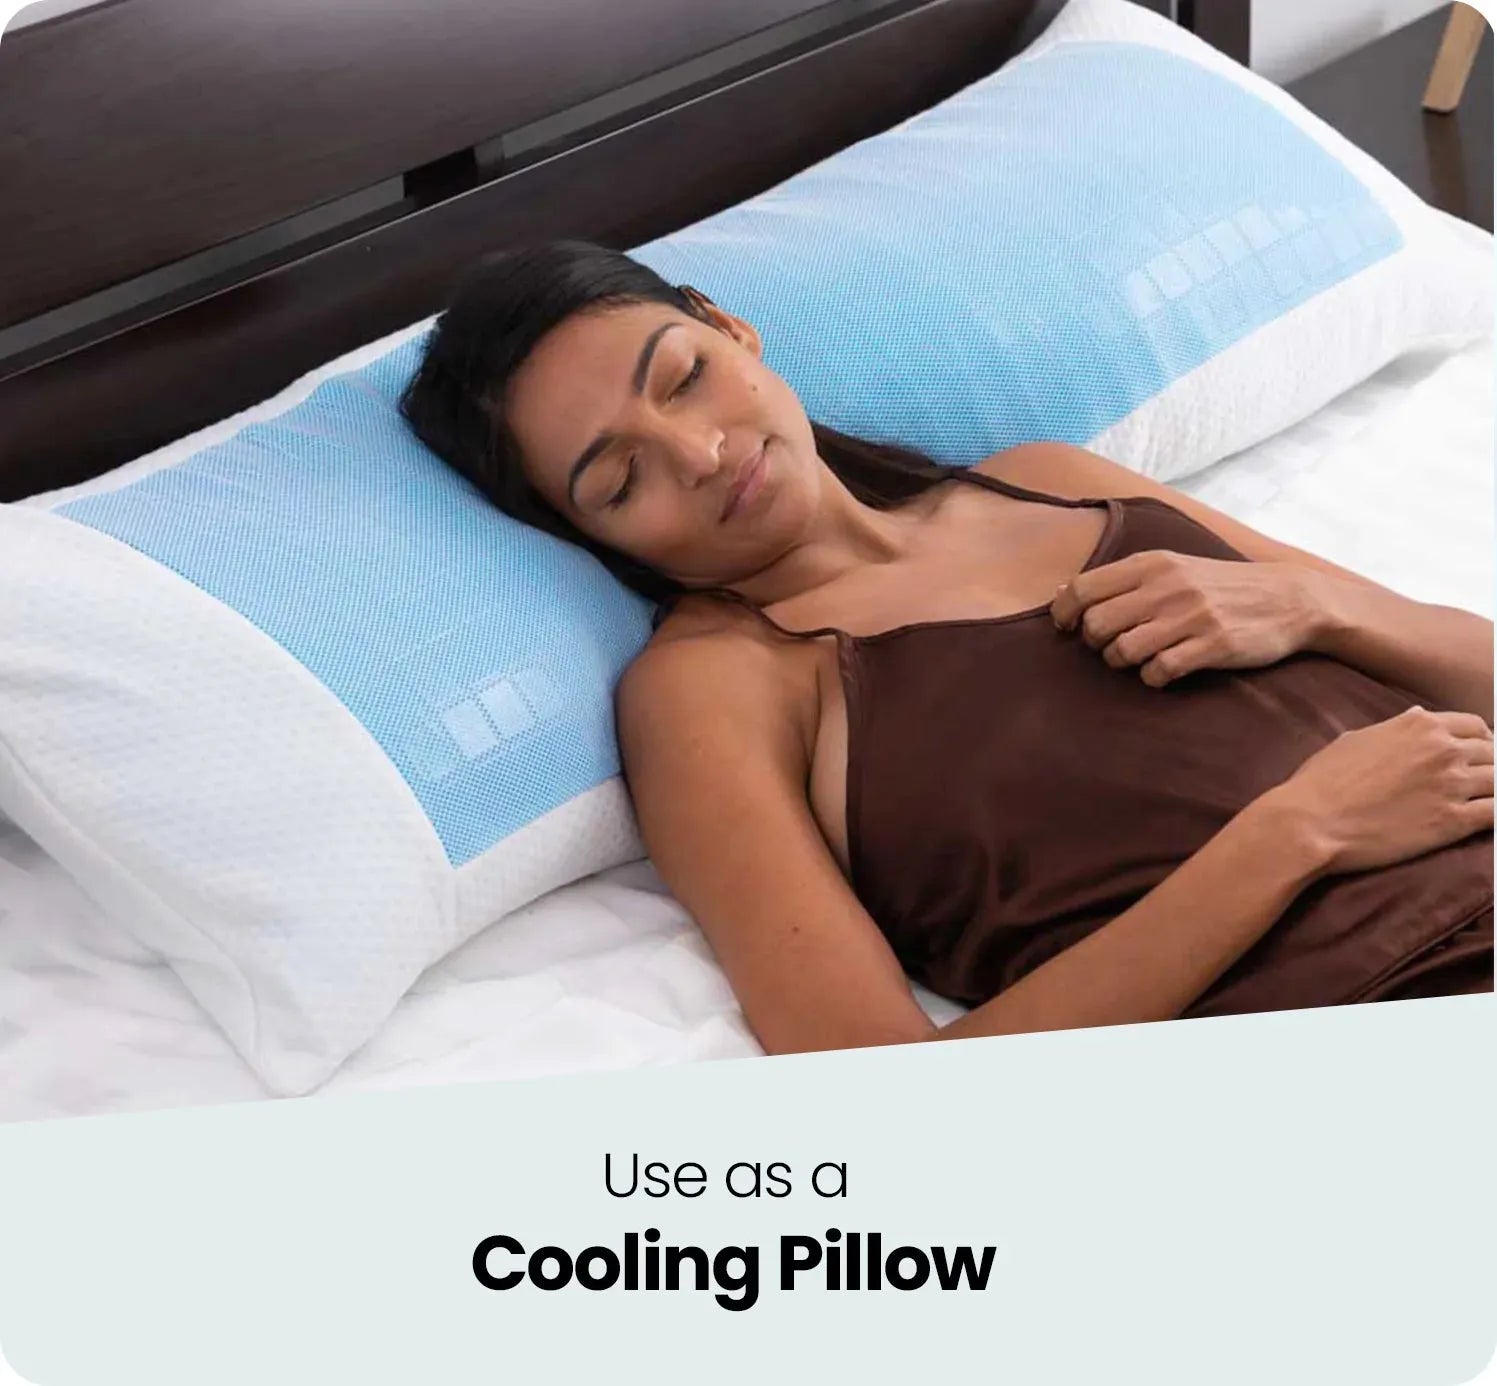 files/use_as_a_cooling_pillow.webp